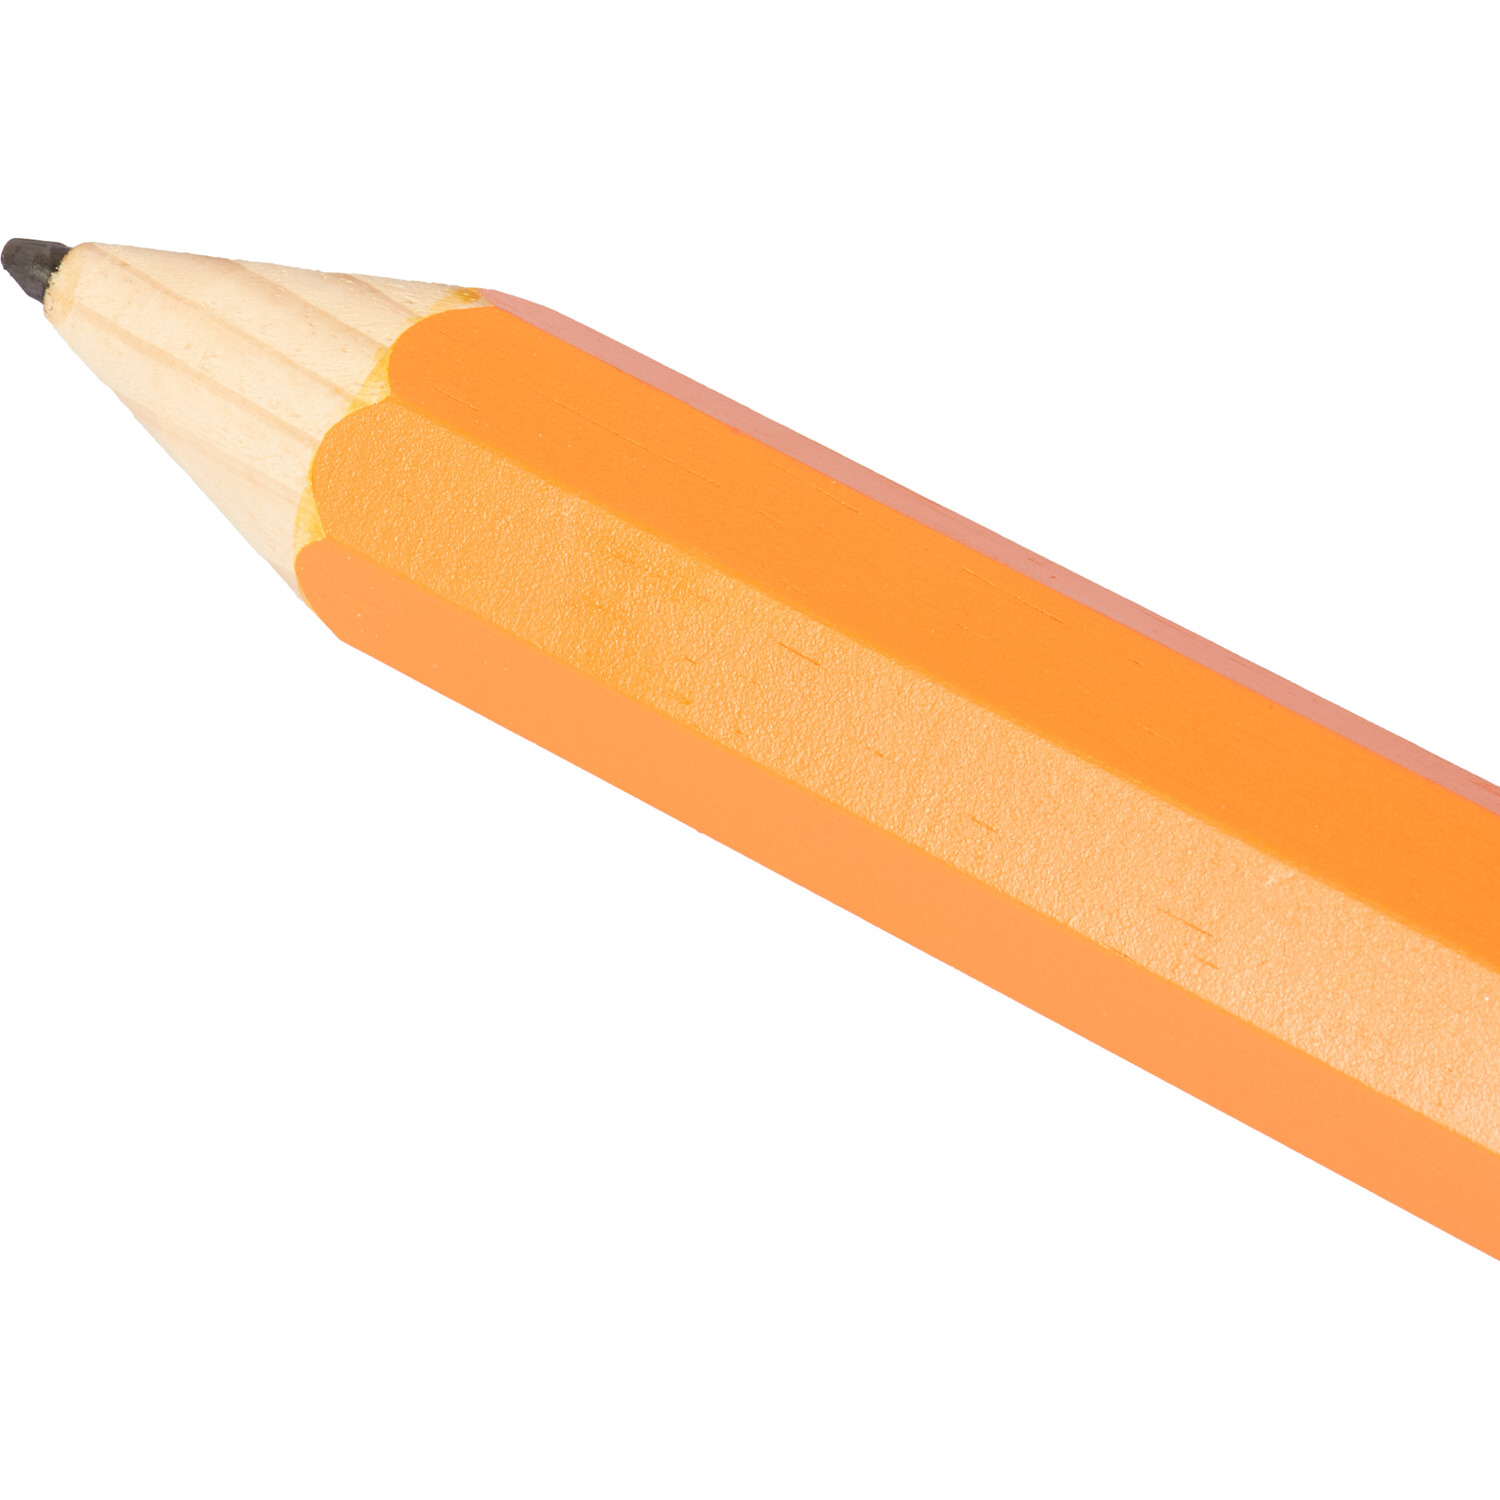 G&G Giant Pencil Image 2